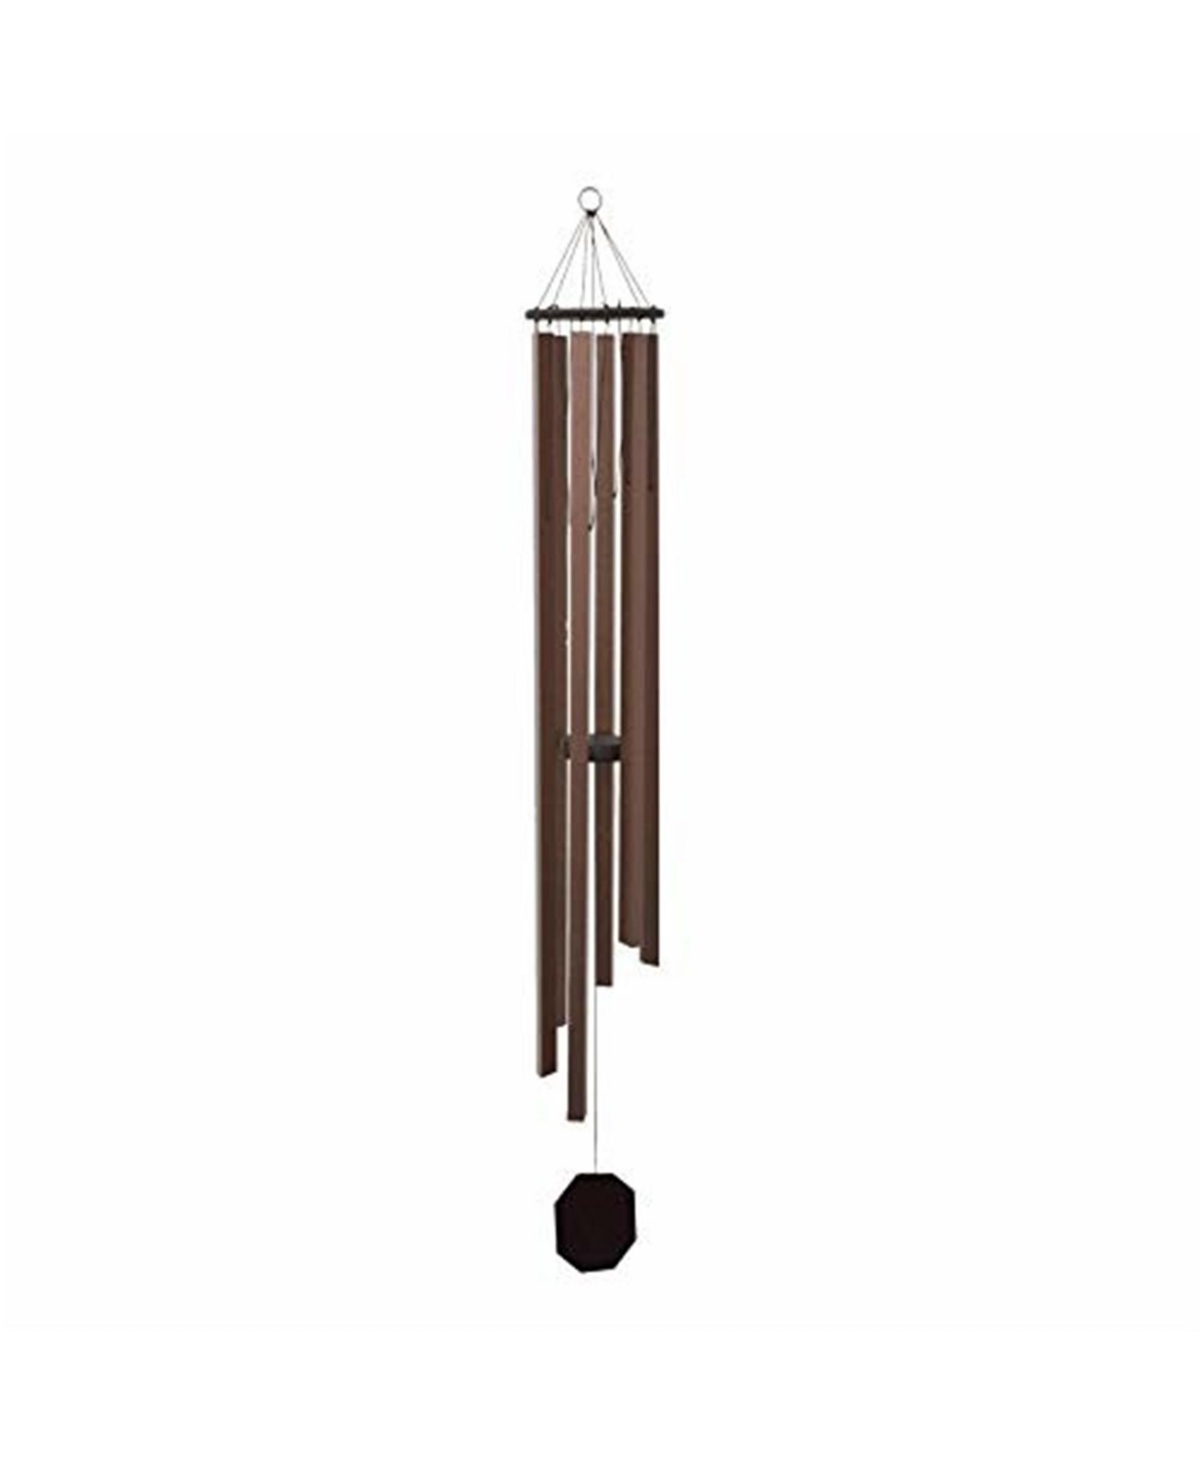 65 Church Bell Wind Chime Amish Crafted Chime - Multi